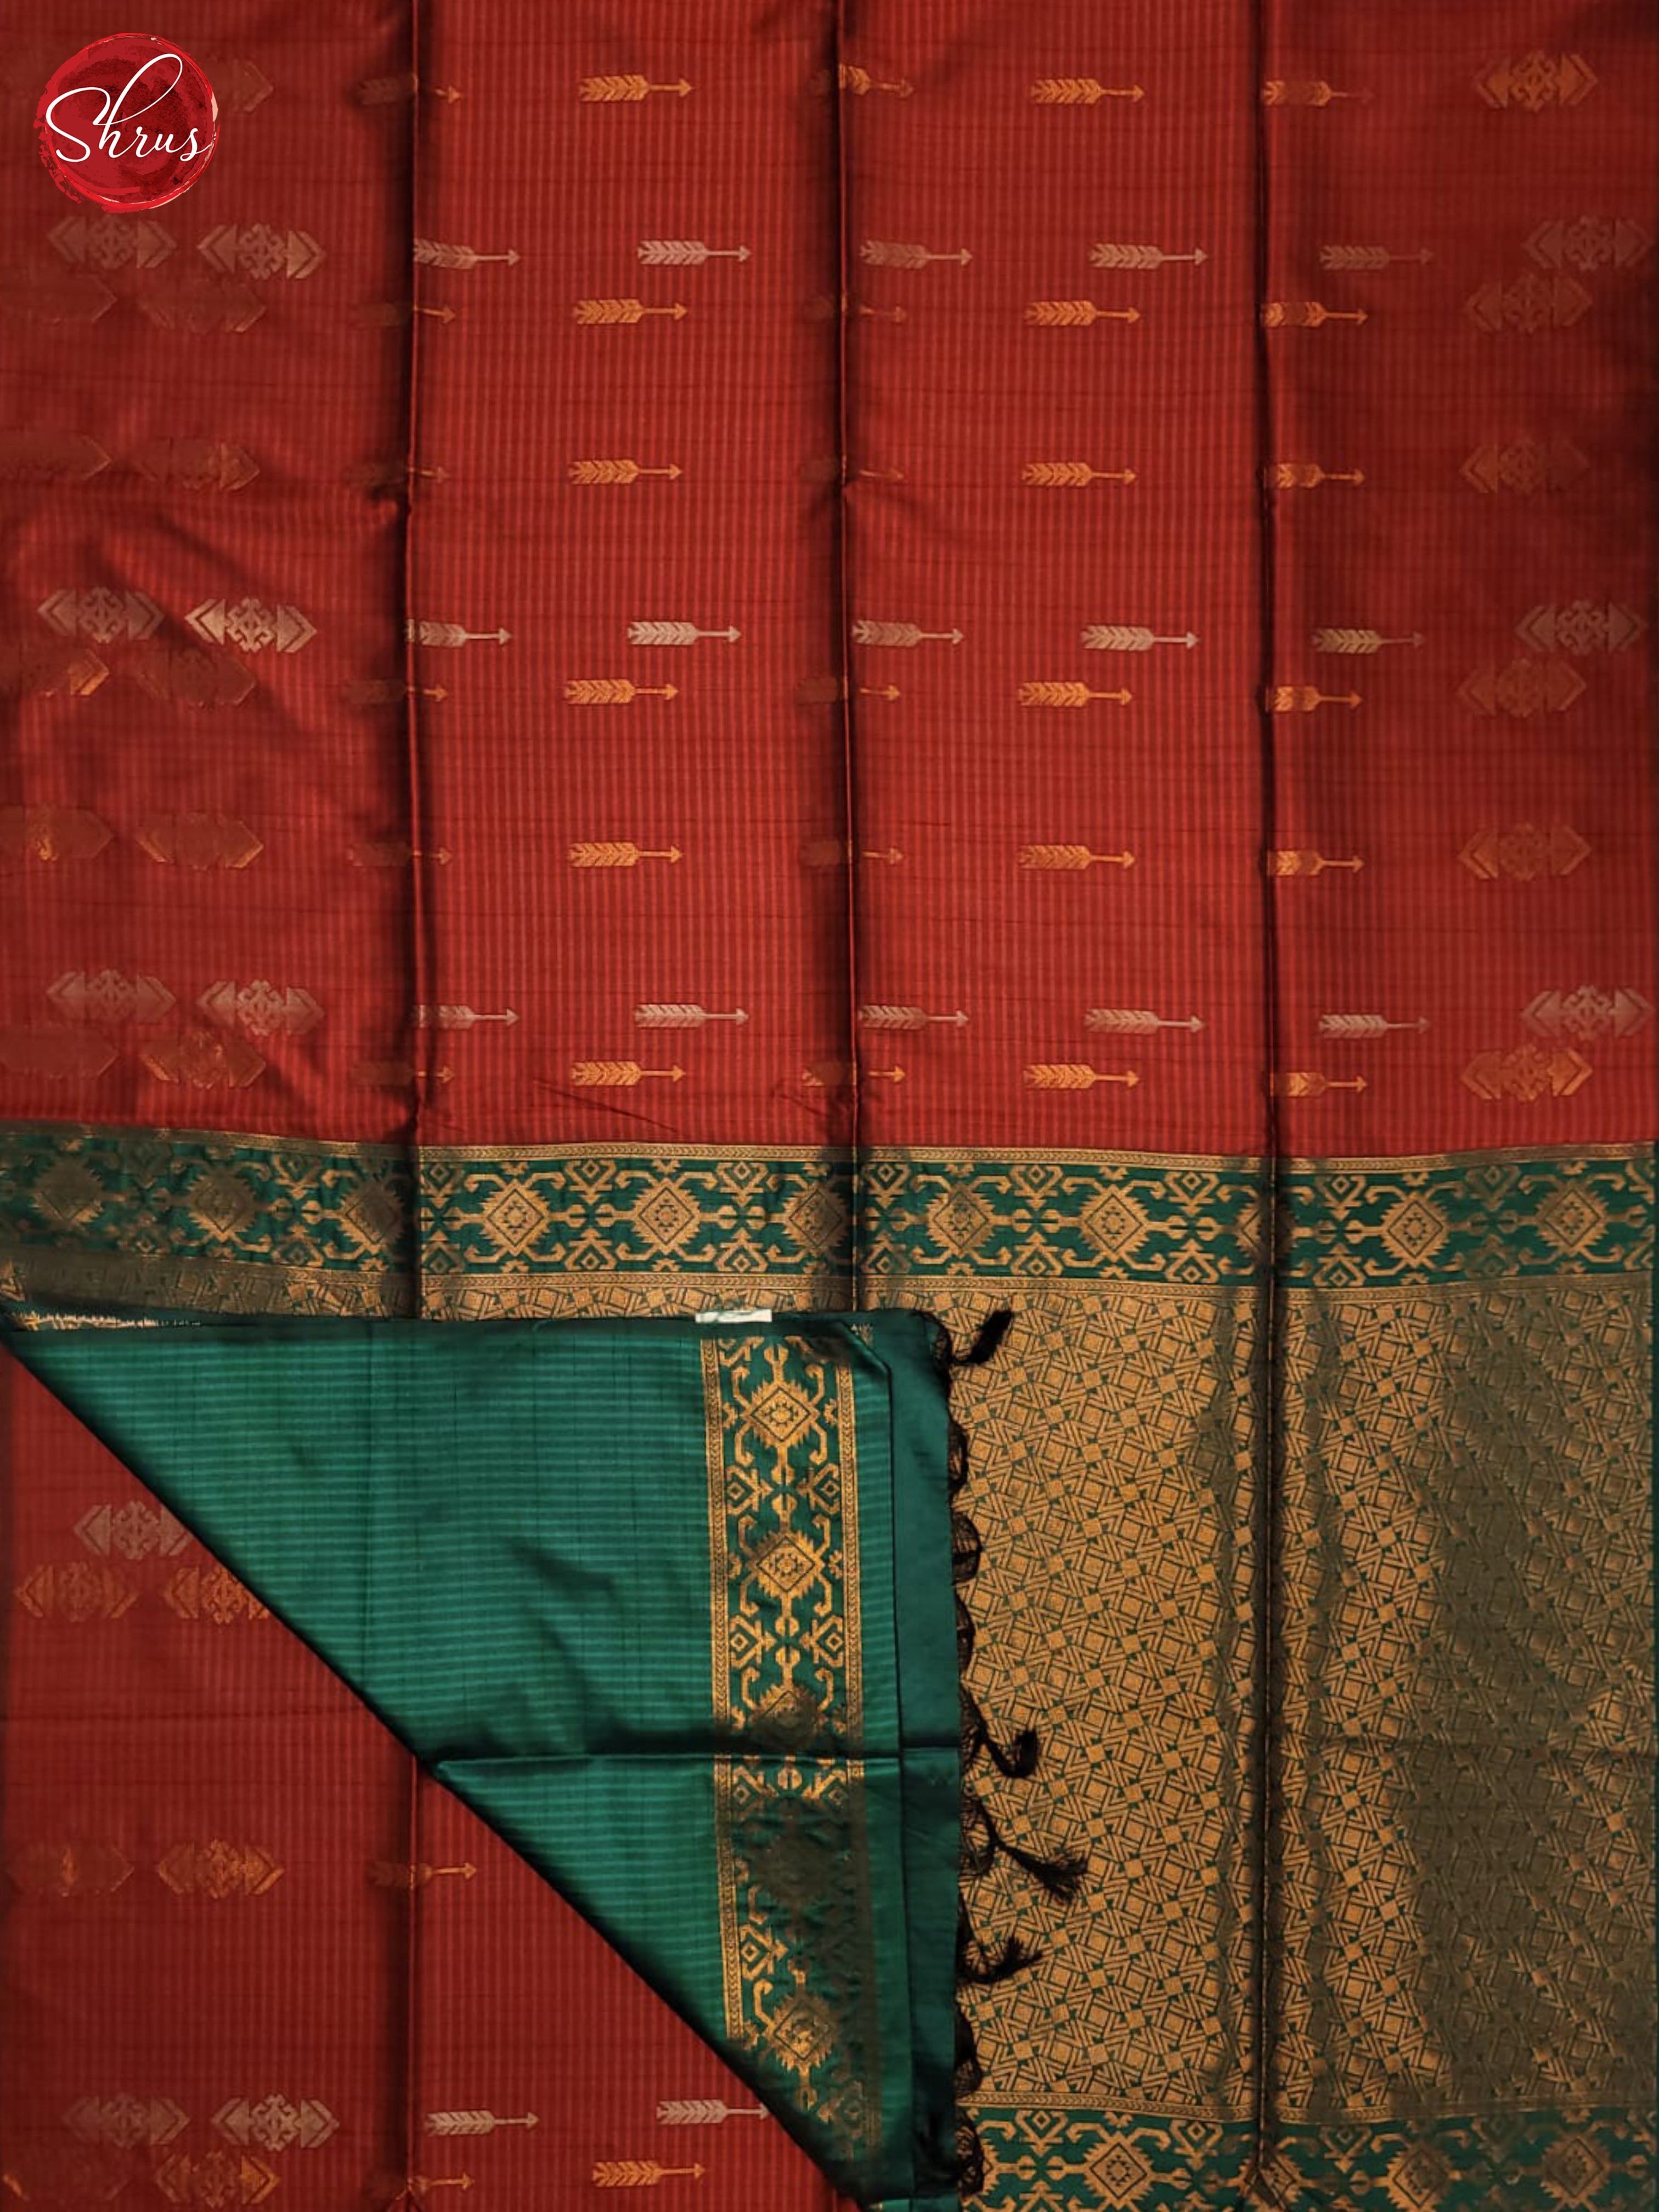 red and green- Semi Tussar Saree - Shop on ShrusEternity.com